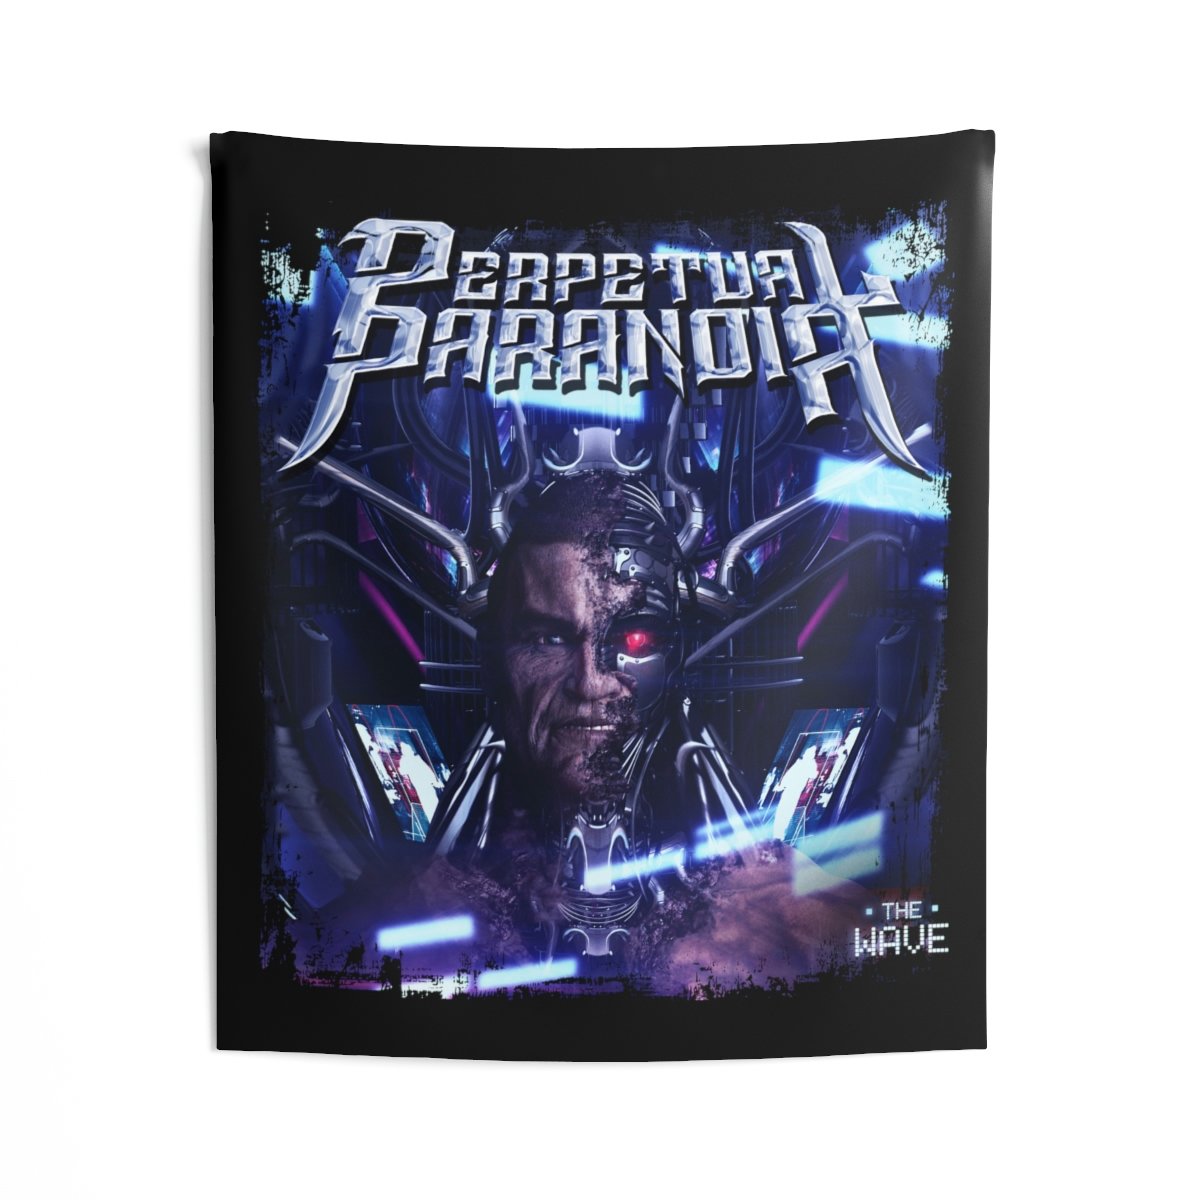 Perpetual Paranoia – The Wave Indoor Wall Tapestries